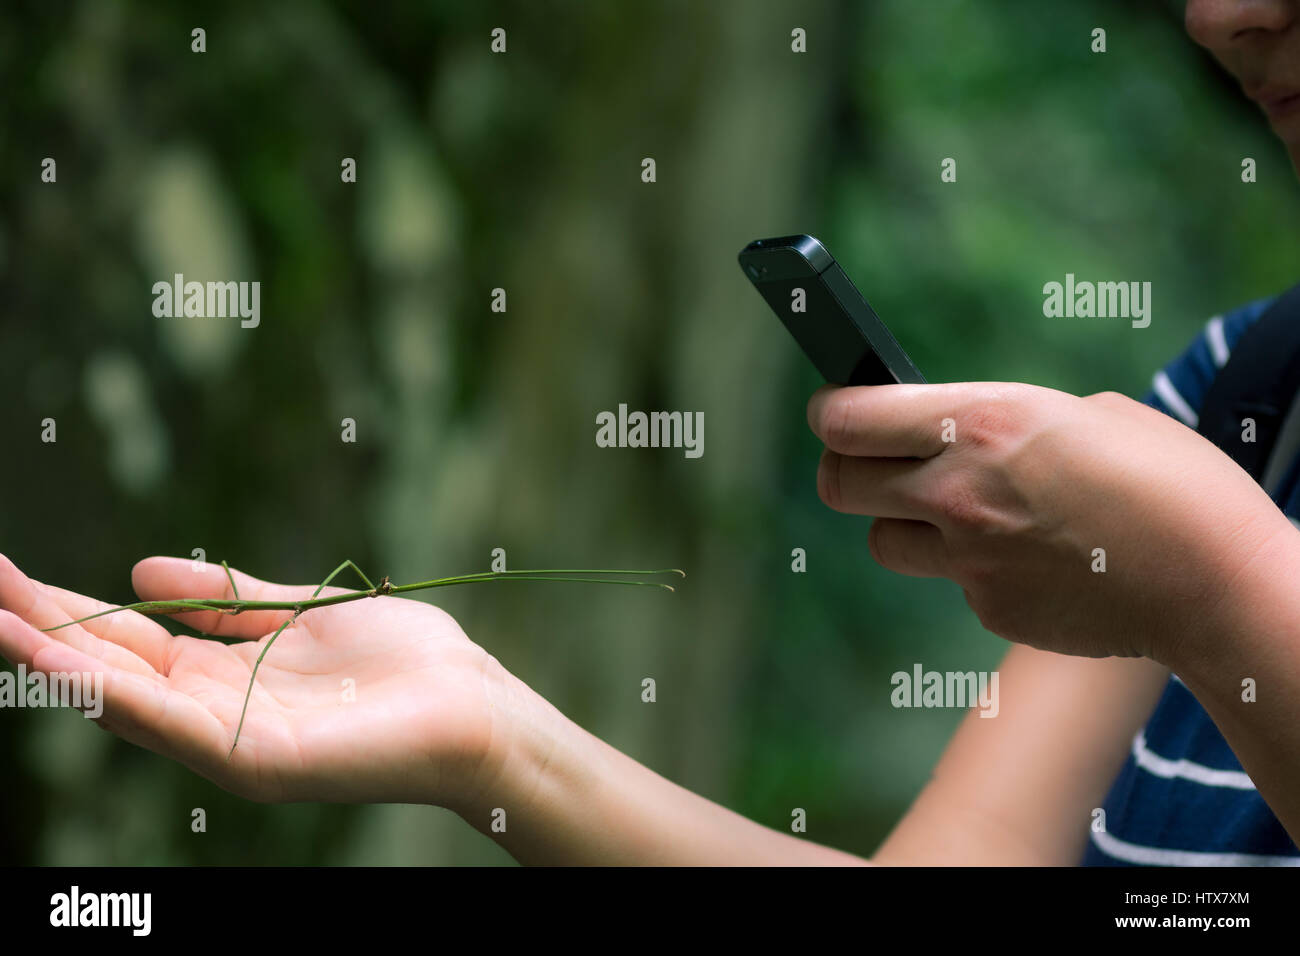 A young woman with a stick insect in one hand and taking photos on her smart phone with the other. Stock Photo